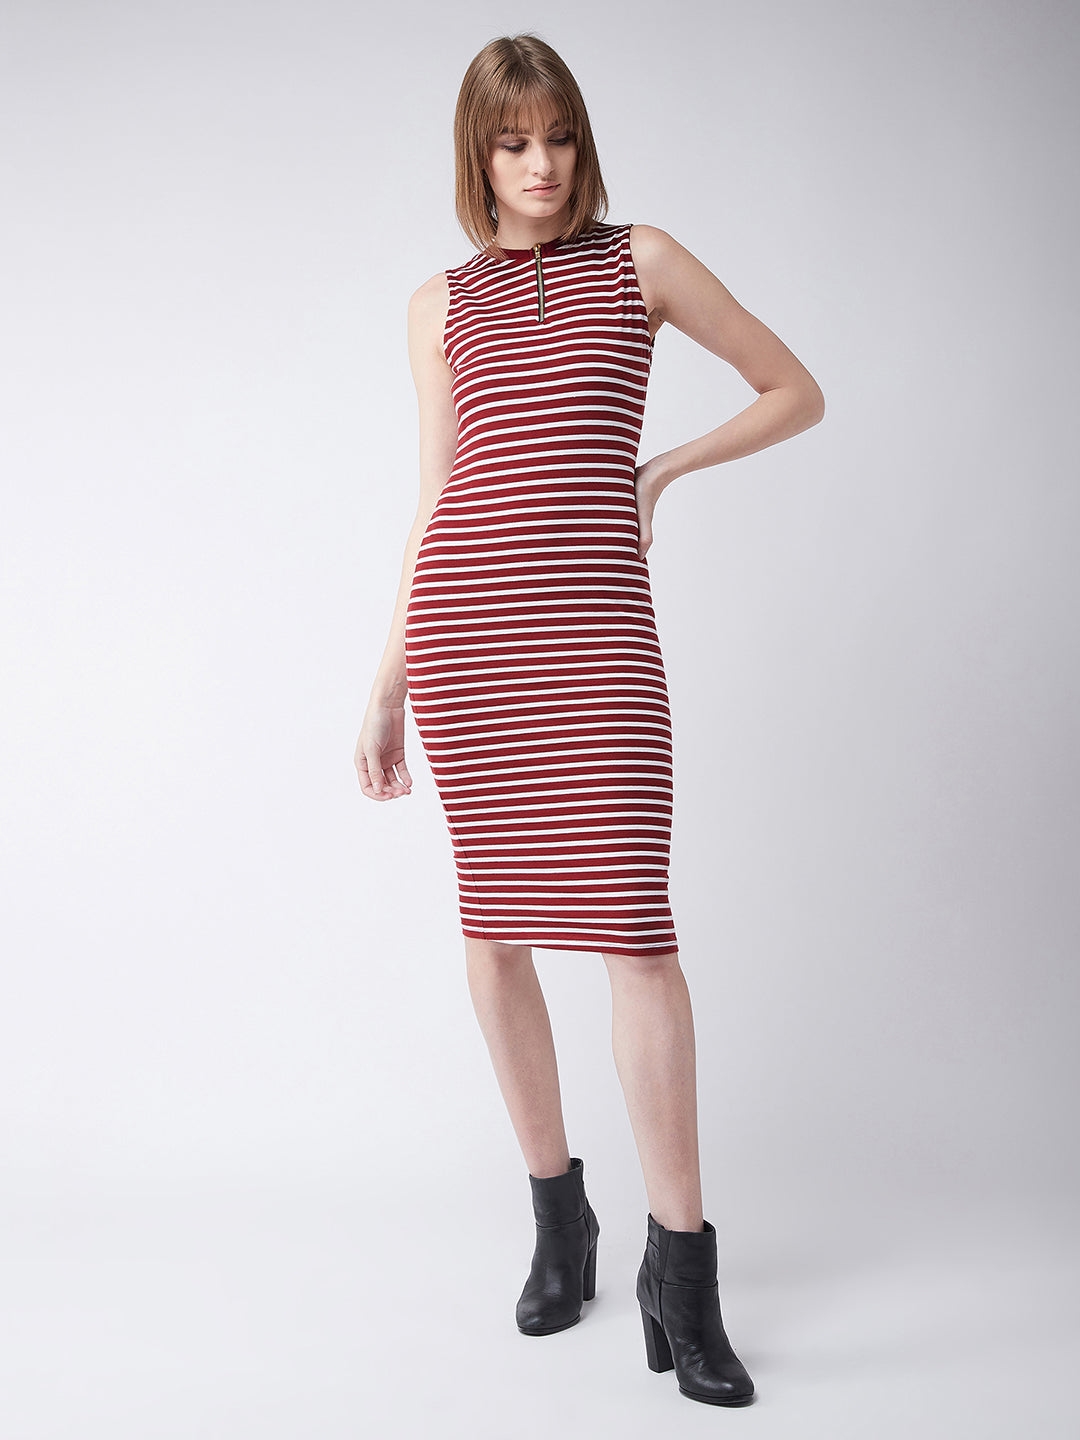 MISS CHASE | Maroon and White Round Neck Sleeveless Striped Bodycon Dress